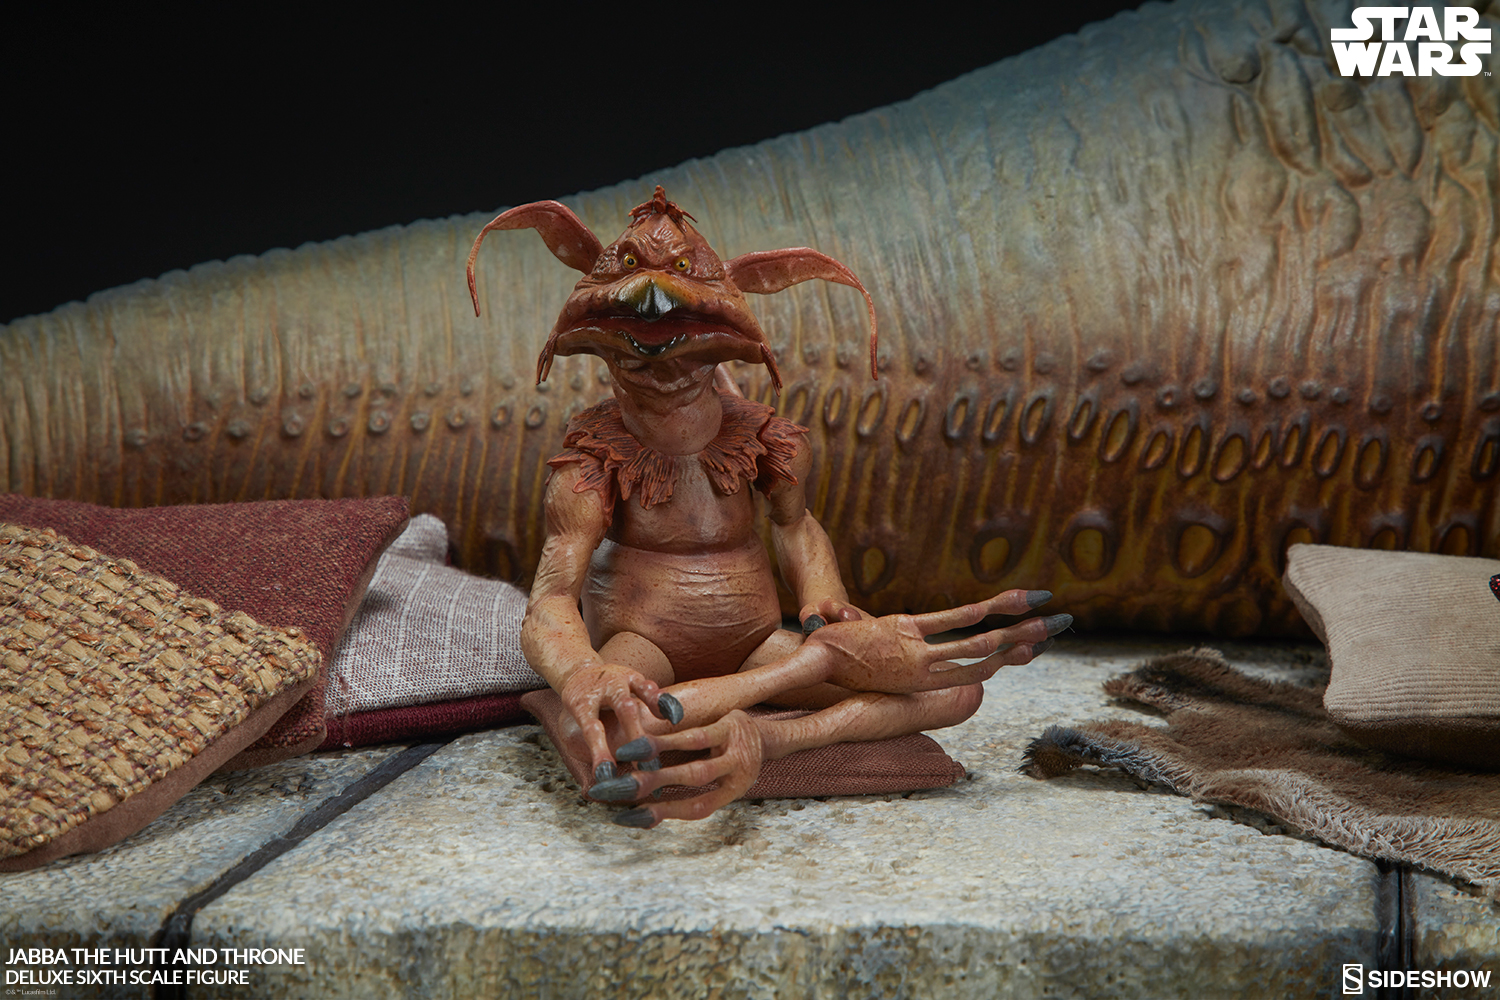 Star Wars Episode VI : Jabba the Hutt and throne - Deluxe Figure (Sideshow) BgOpnyLp_o